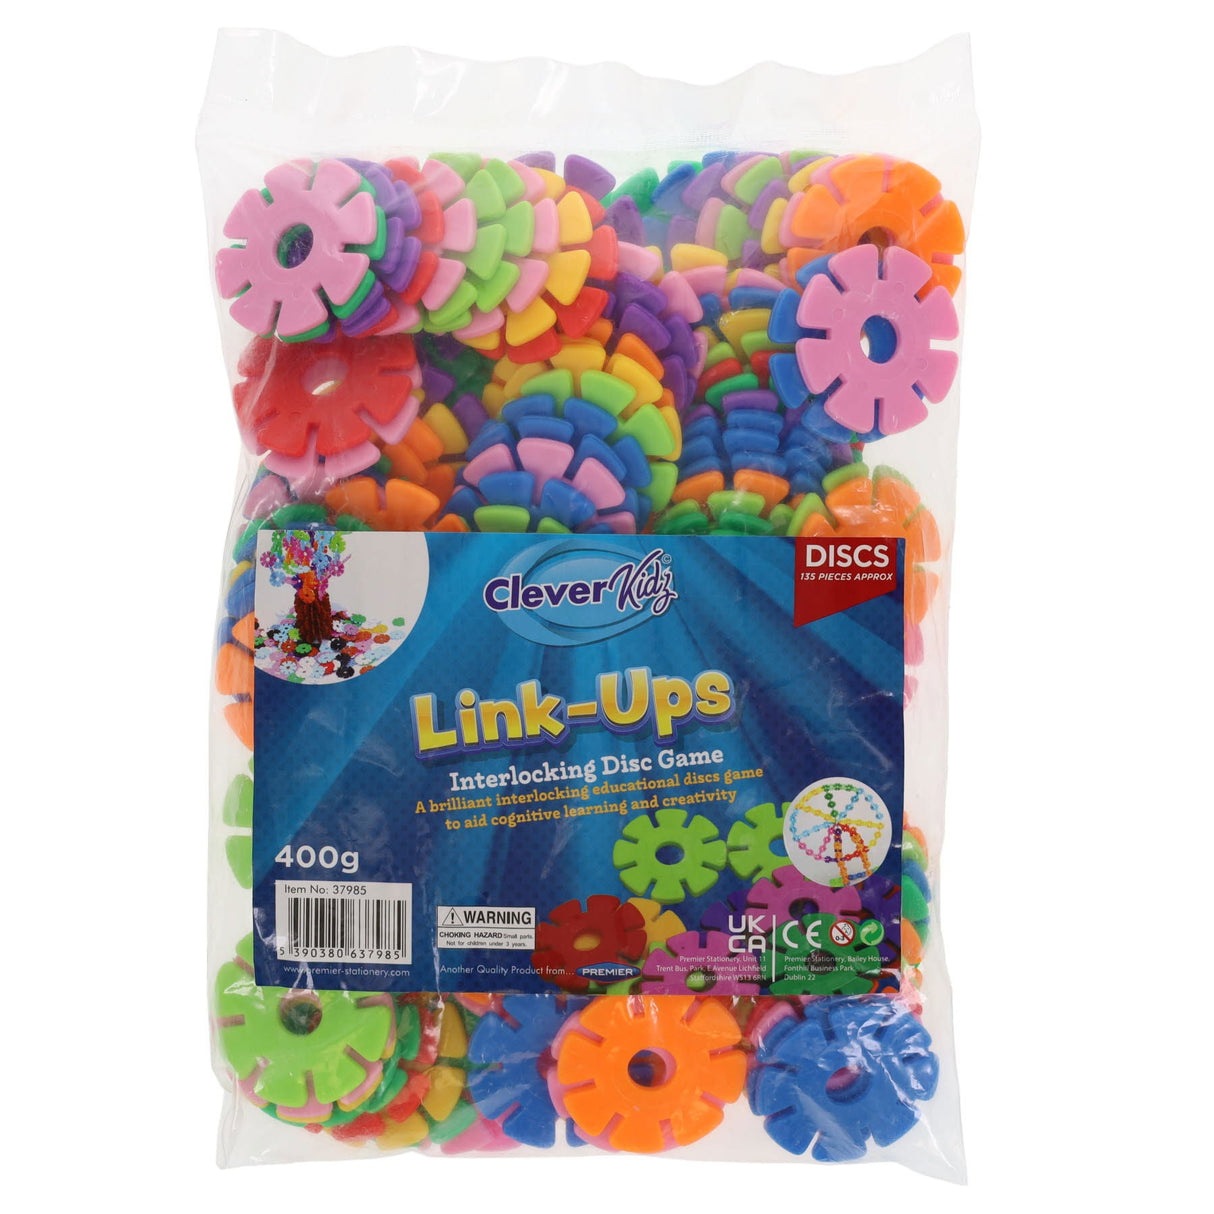 Clever Kidz Link-Ups Interlocking Disc Game Learning Resources - Pack of 135 | Stationery Shop UK